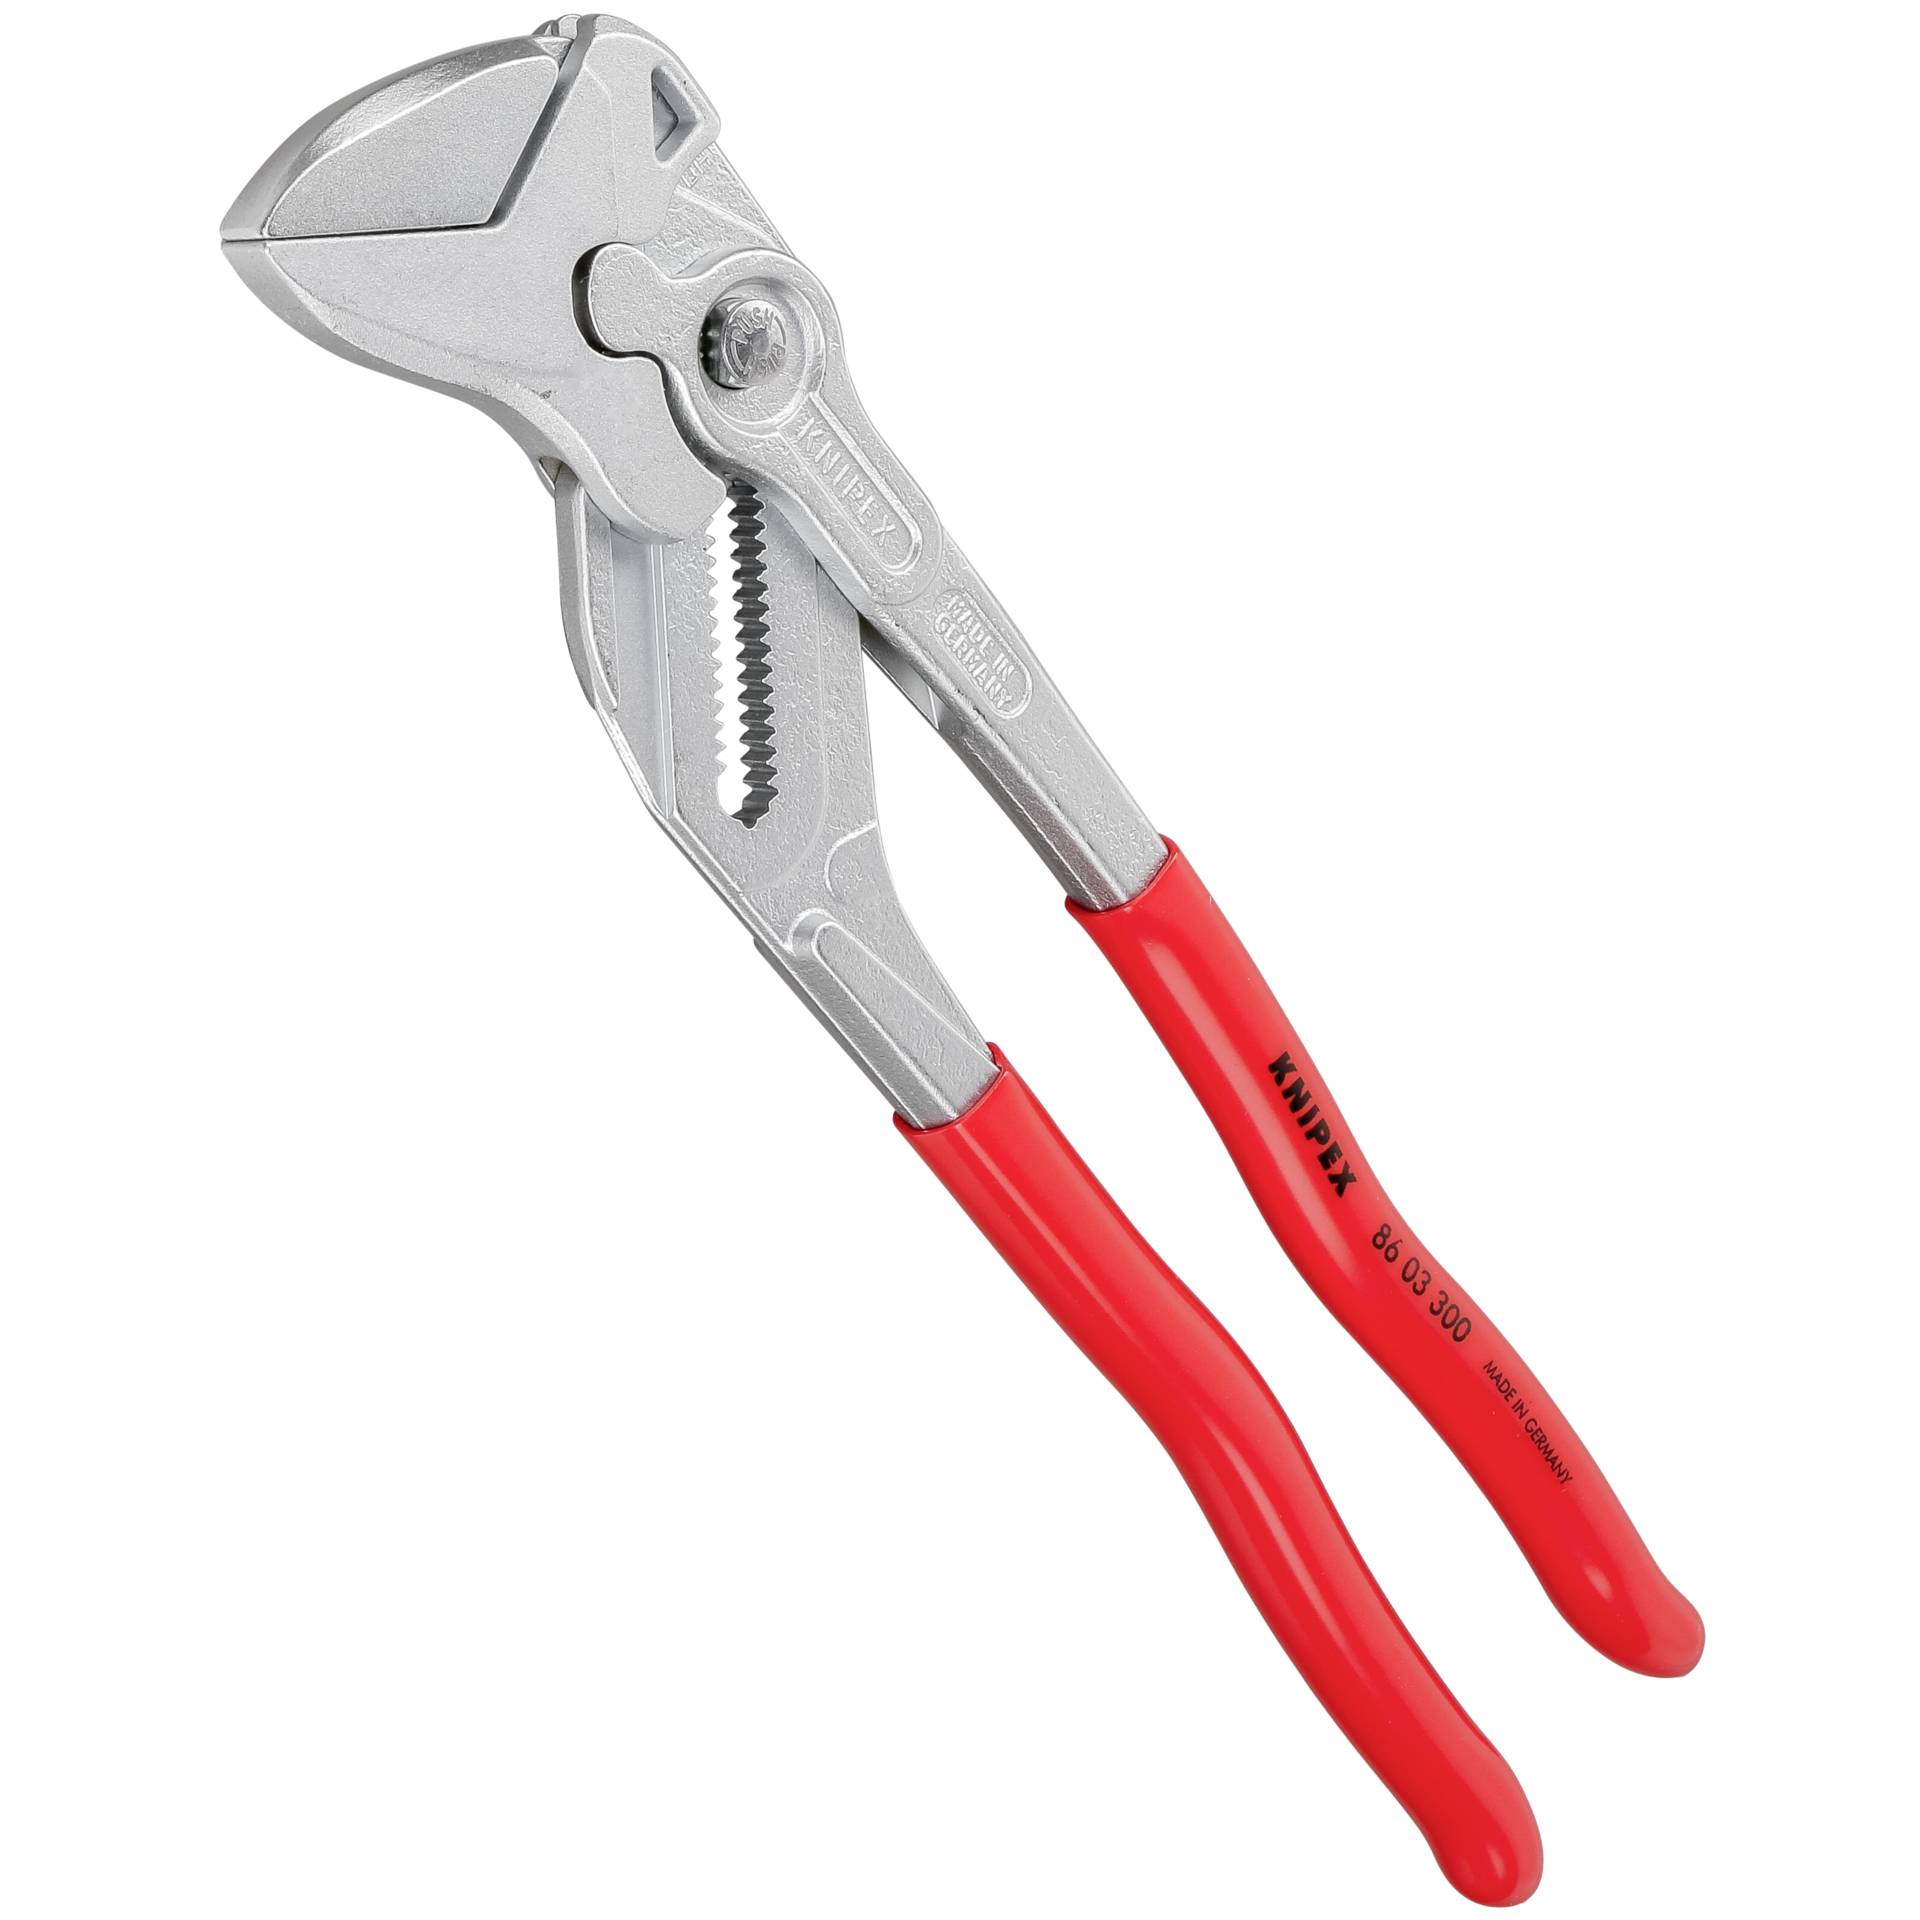 KNIPEX Pinza chiave 300 mm Rivestimento in resina sintetica